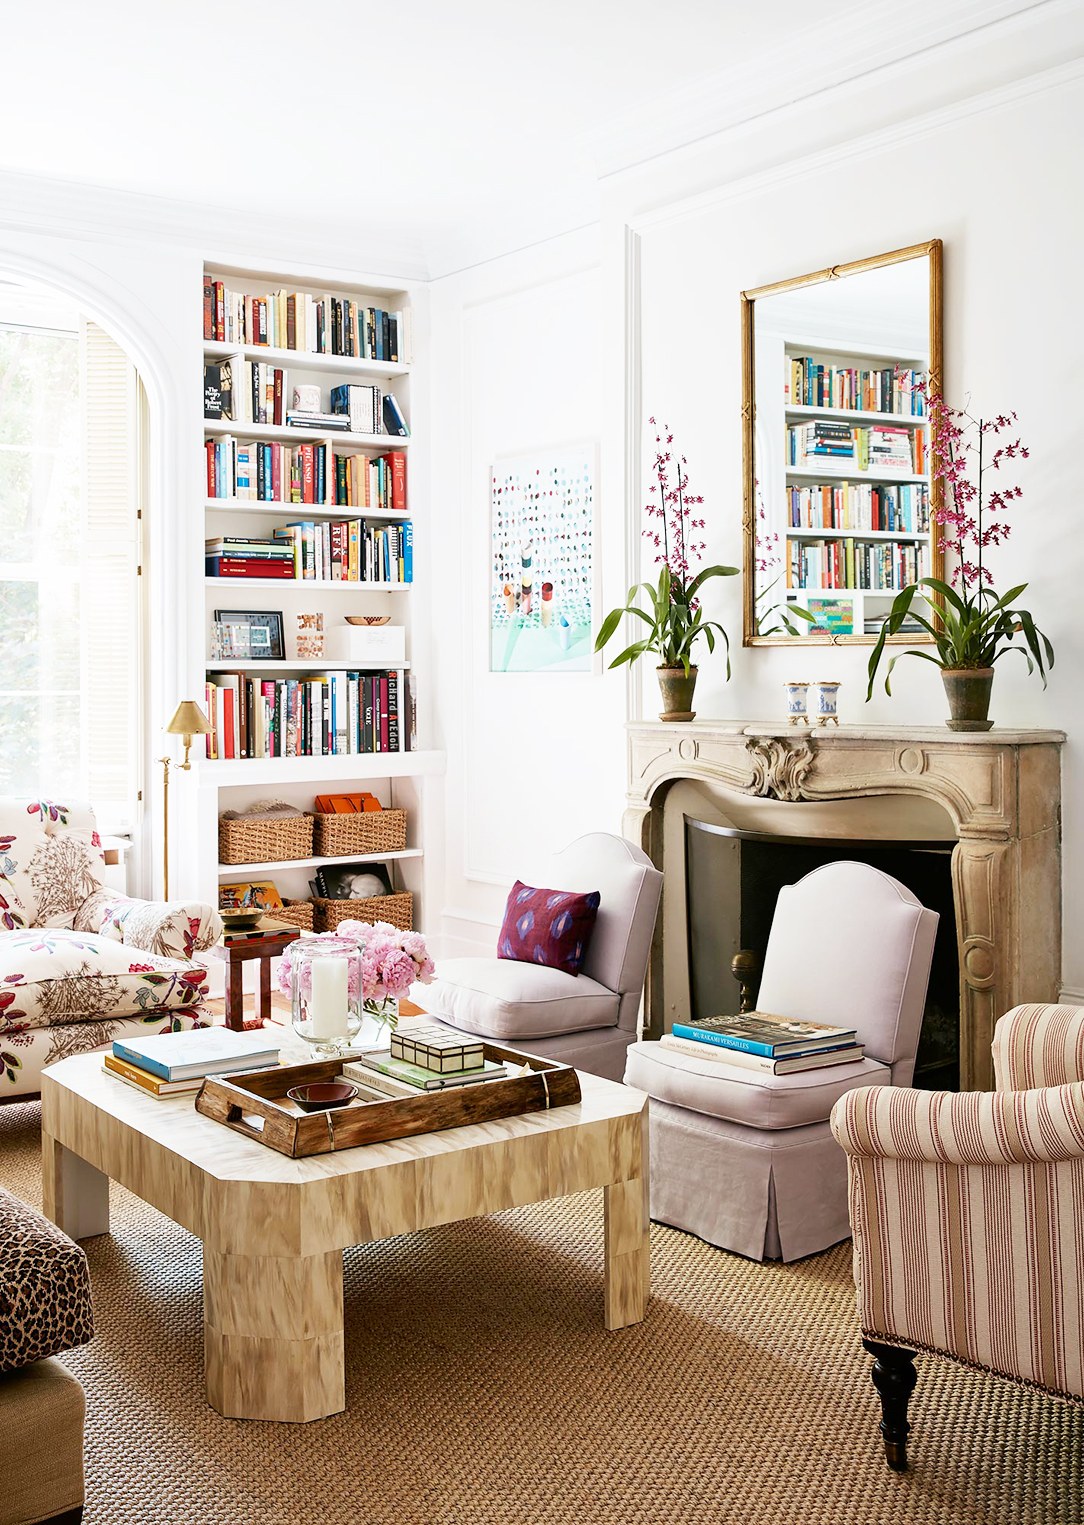 06--At Home With | Lauren McGrath, New York-This Is Glamorous